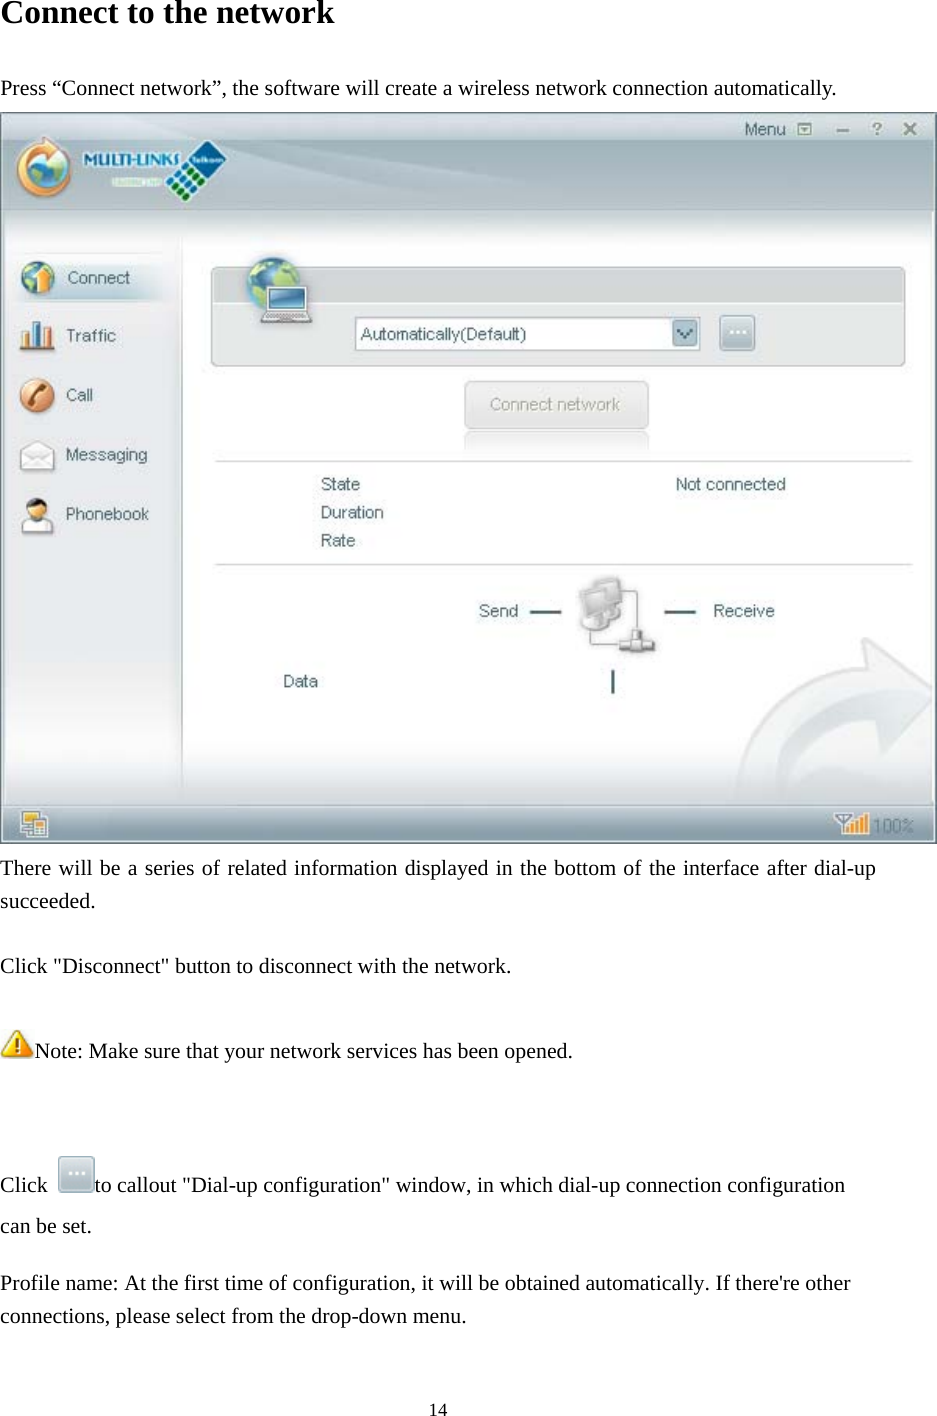  14 Connect to the network Press “Connect network”, the software will create a wireless network connection automatically.  There will be a series of related information displayed in the bottom of the interface after dial-up succeeded.  Click &quot;Disconnect&quot; button to disconnect with the network.  Note: Make sure that your network services has been opened.   Click  to callout &quot;Dial-up configuration&quot; window, in which dial-up connection configuration can be set. Profile name: At the first time of configuration, it will be obtained automatically. If there&apos;re other connections, please select from the drop-down menu.   